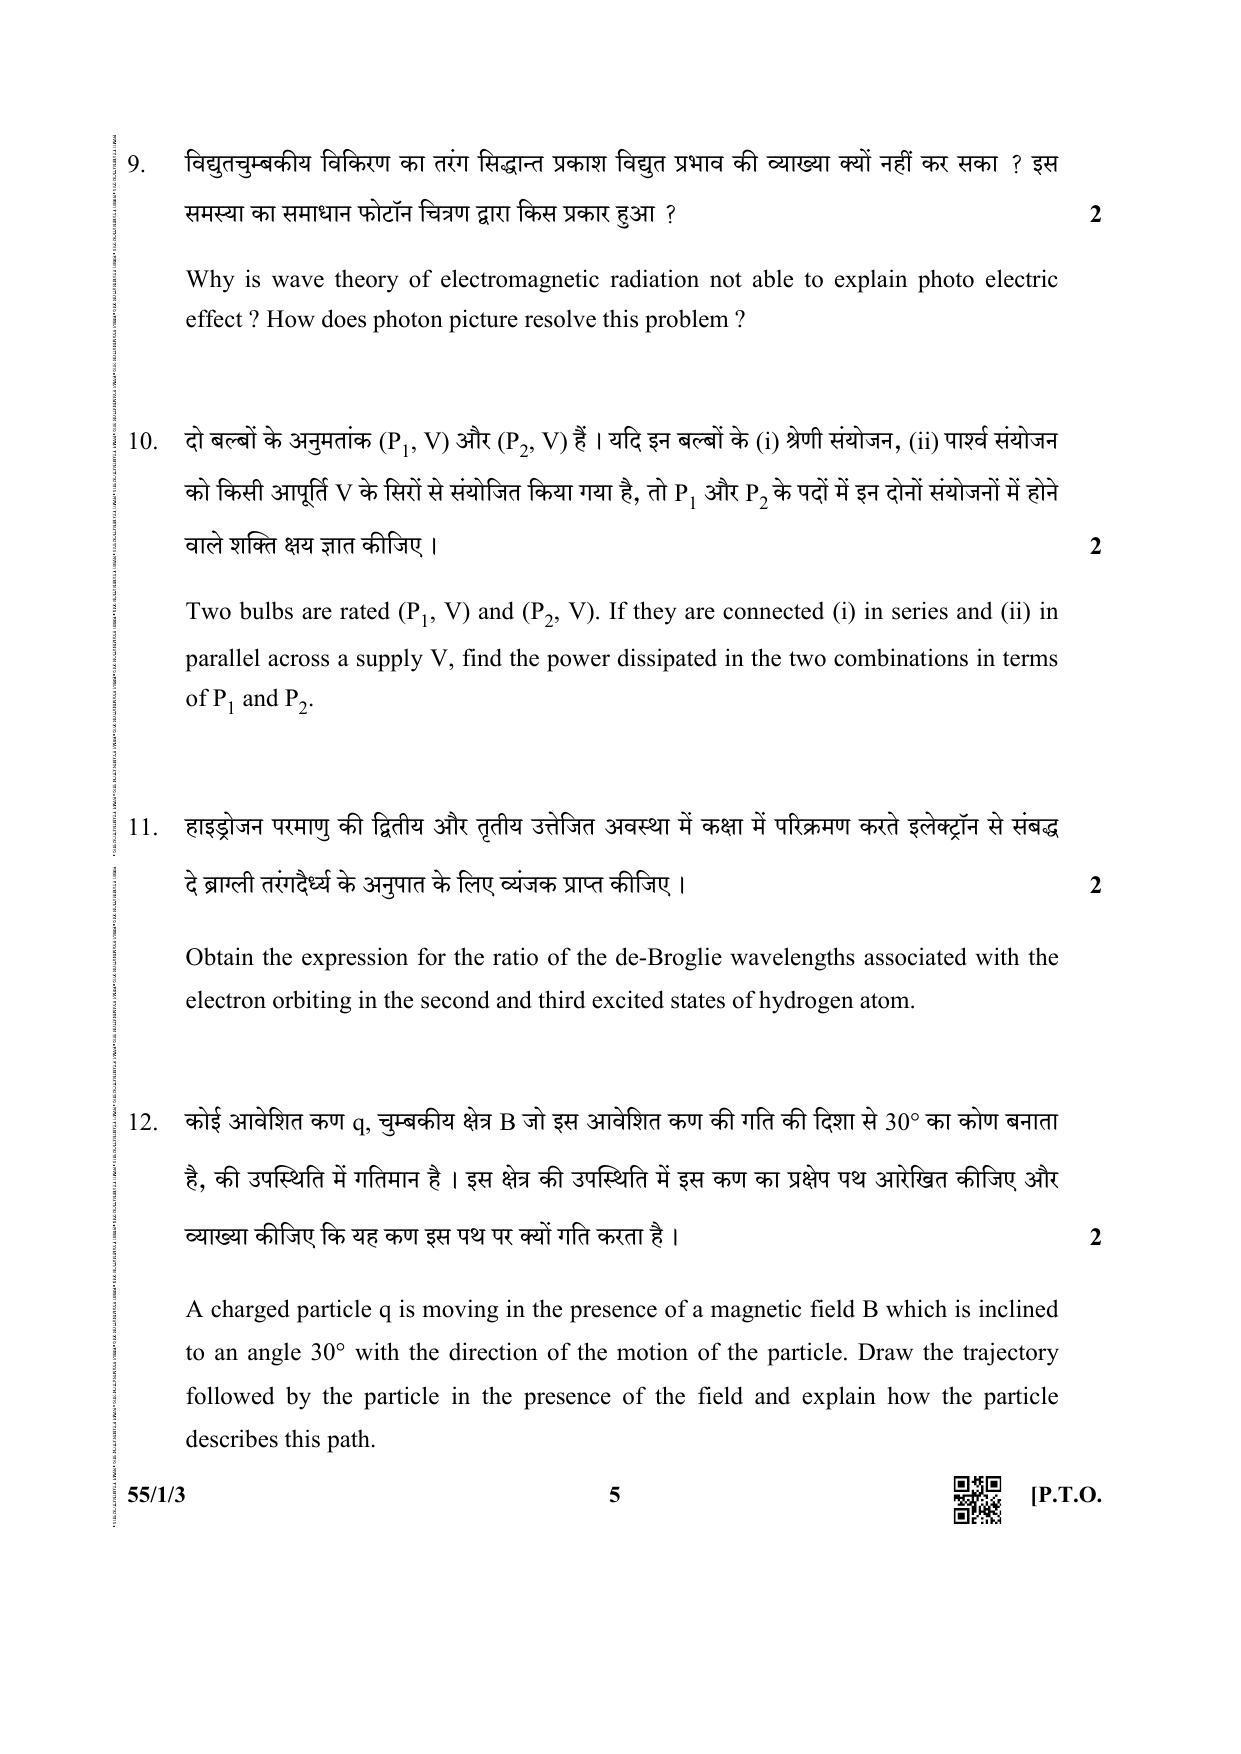 CBSE Class 12 55-1-3 (Physics) 2019 Question Paper - Page 5